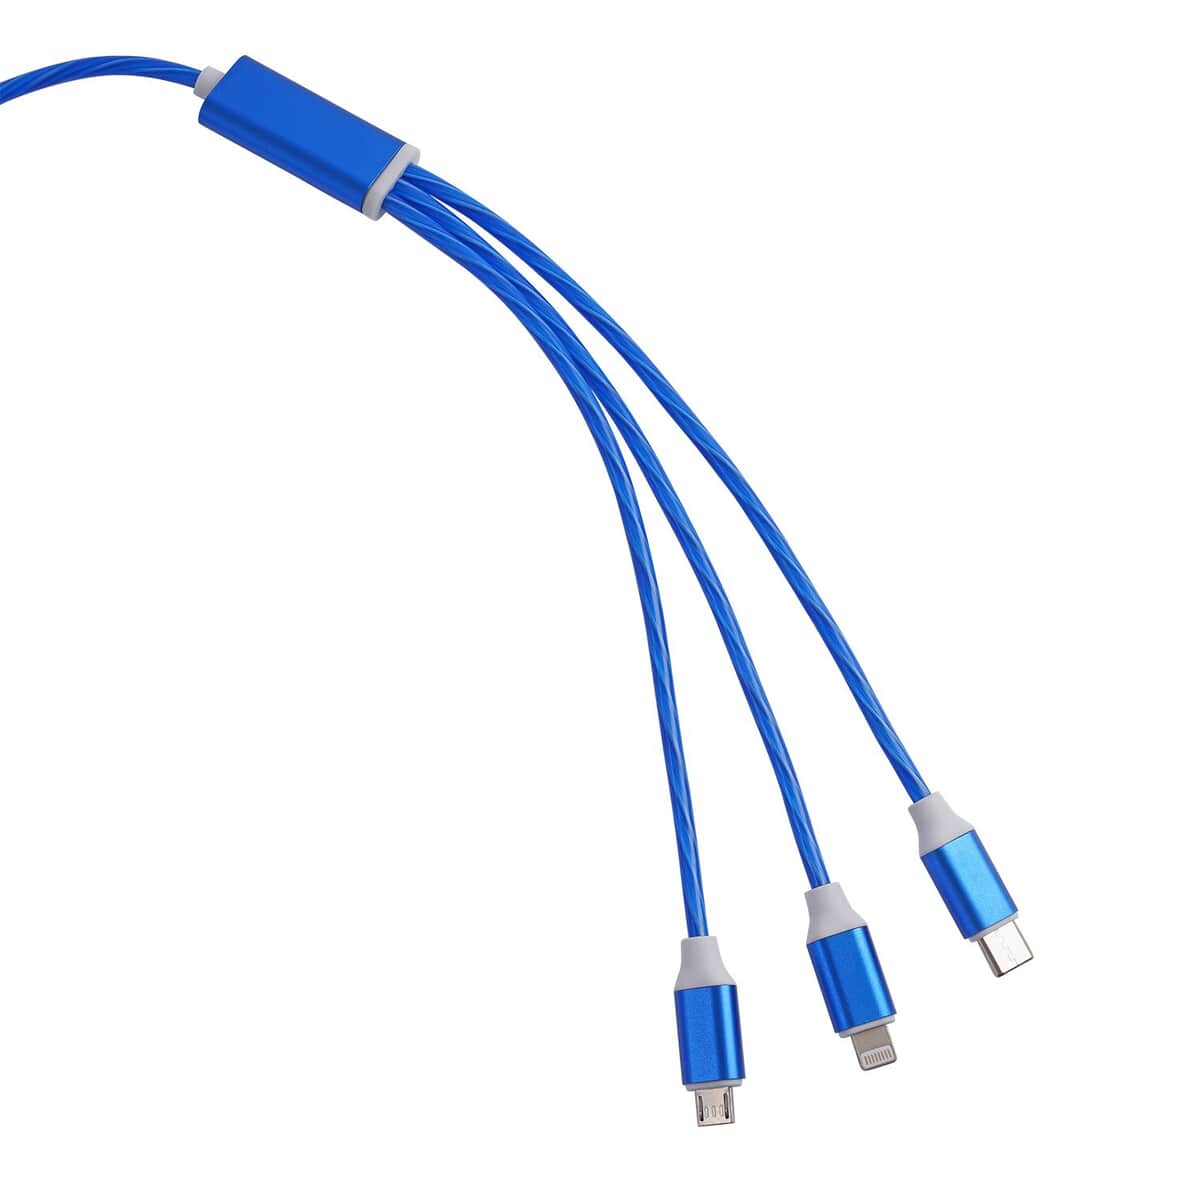 2pcs Set 3 in 1 Light Moving Charging Cable - Blue image number 2